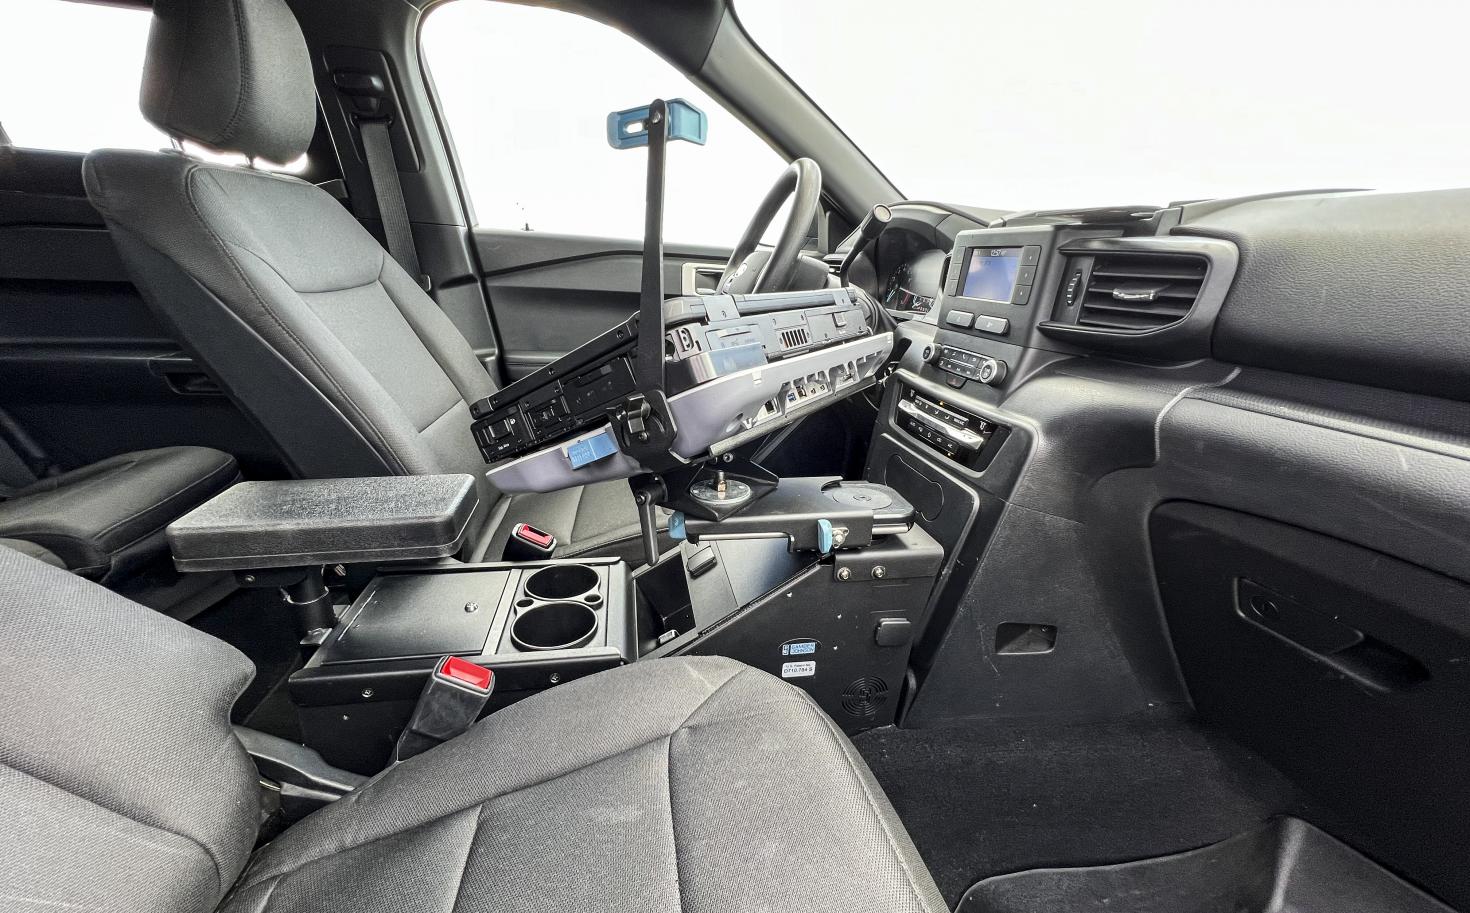 Panasonic Toughbook 40 Gamber-Johnson Docking Station installed in Ford Interceptor Utility side view